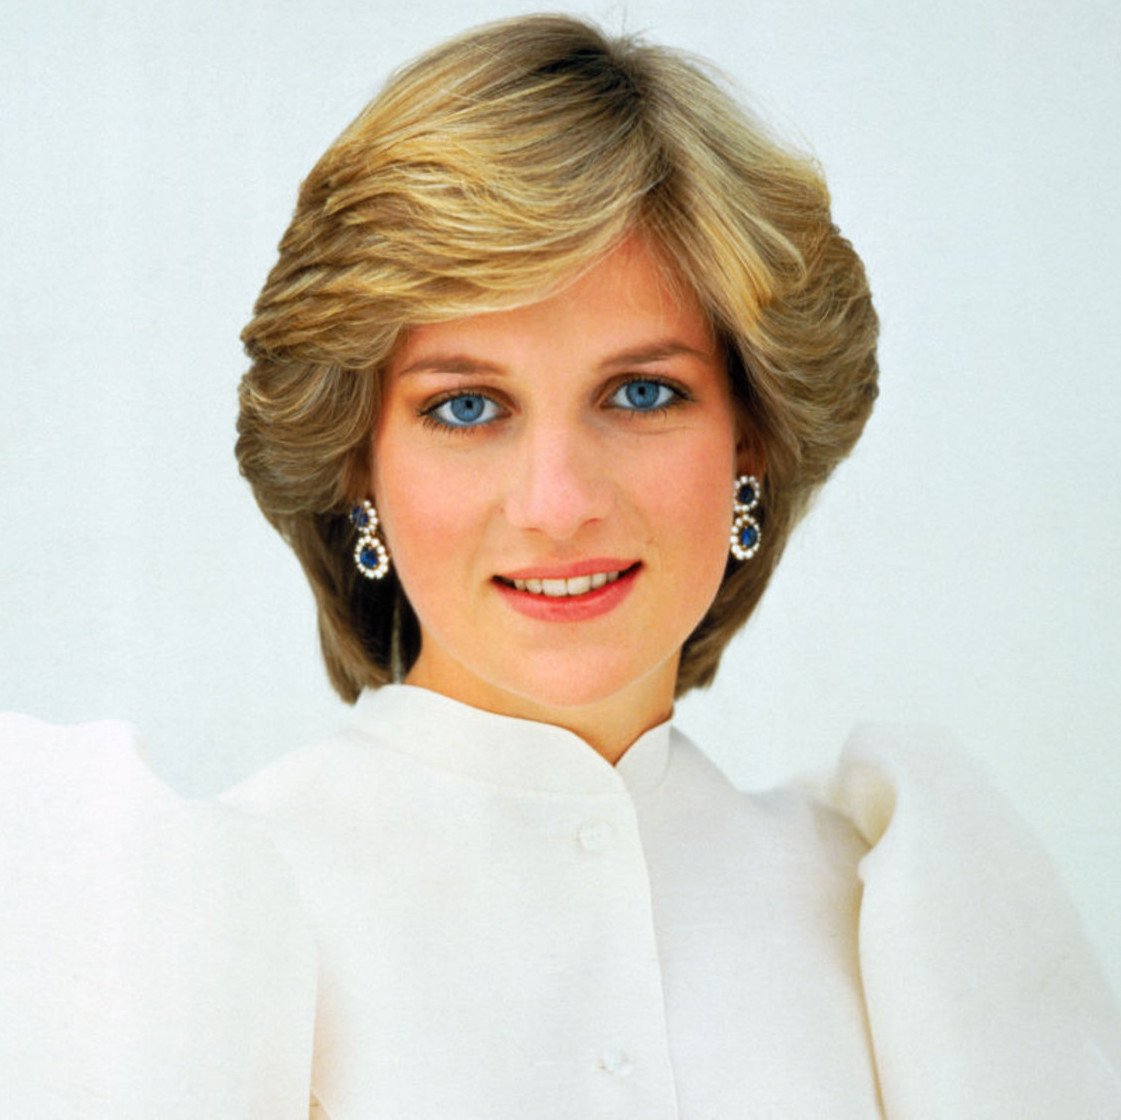 Enneagram 6 Example Diana, Princess of Wales